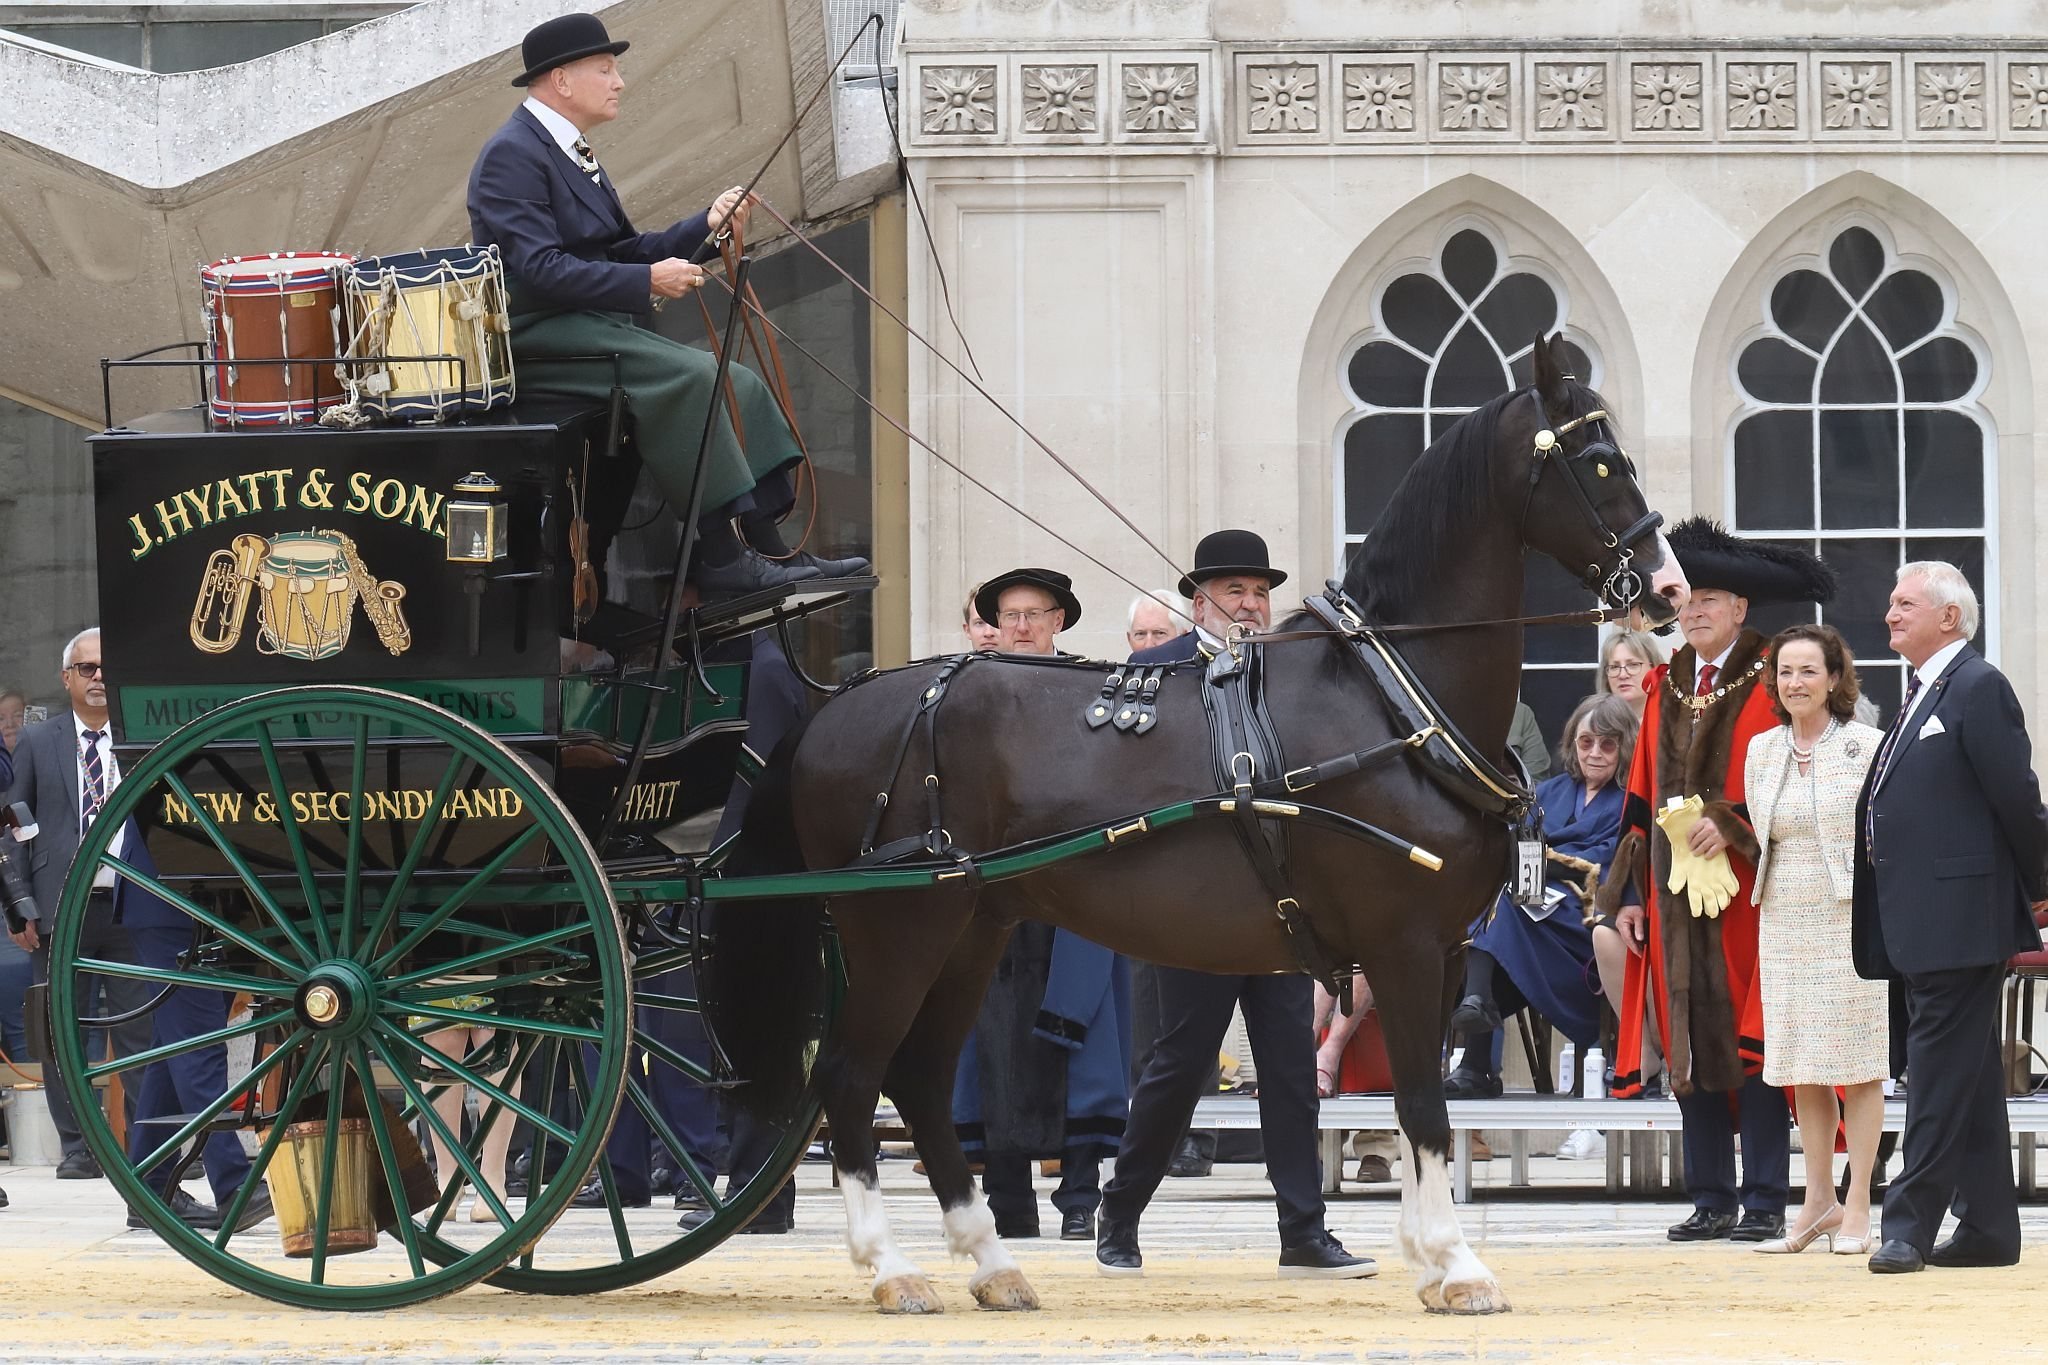 Horse Drawn Delivery Van, Holland And Holland. City of London 2023 Cart Marking in Guildhall Yard on 22-Jul-2023. Hosted by the Worshipful Company of Carmen with the Lord Mayor of the City of London in attendance. Wooden plates on the vehicles are branded with hot irons to allow them to ply for trade in the Square Mile. Another of the City Livery Company's annual ceremonies.